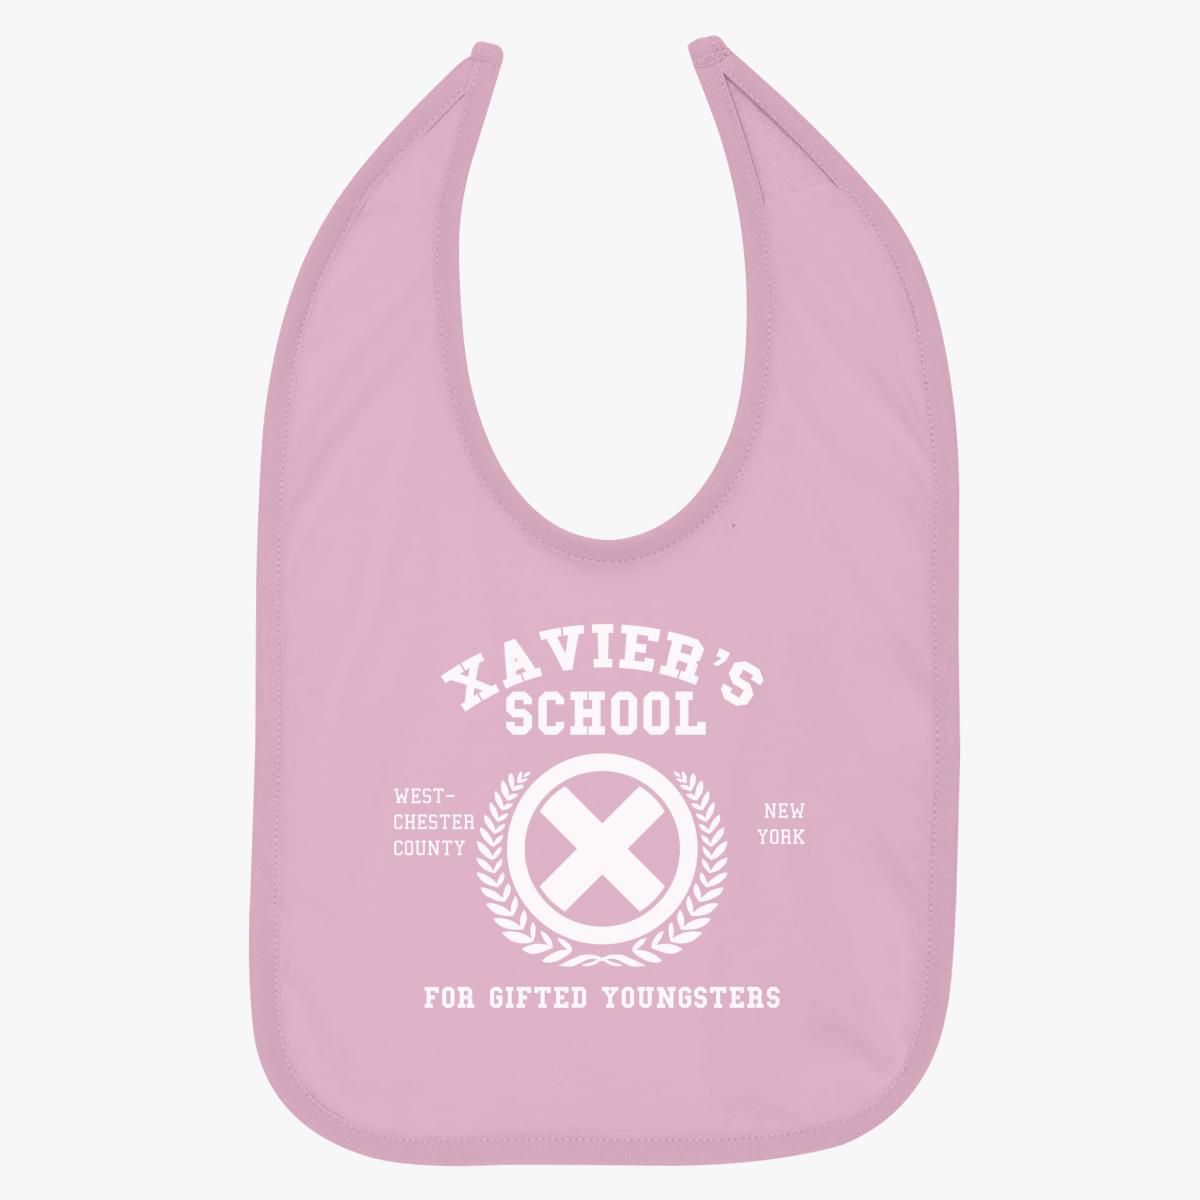 Download Xavier's School for Gifted Youngsters Baby Bib - Customon